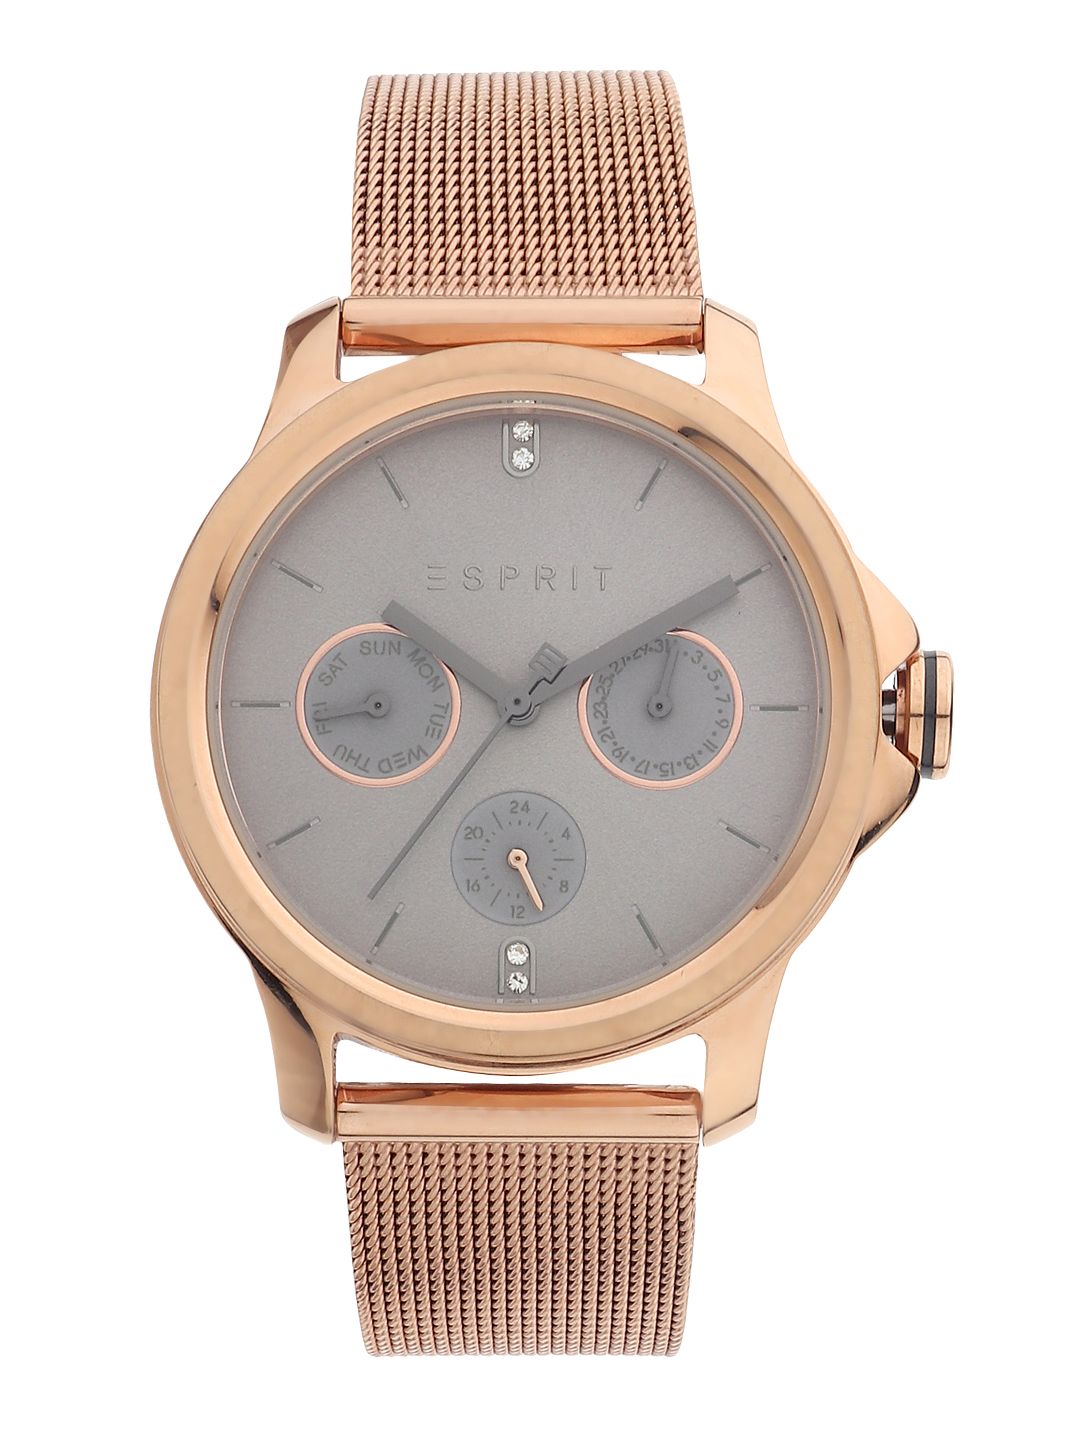 ESPRIT Women Rose Gold-Toned Analogue Watch ES1L145M0095 Price in India